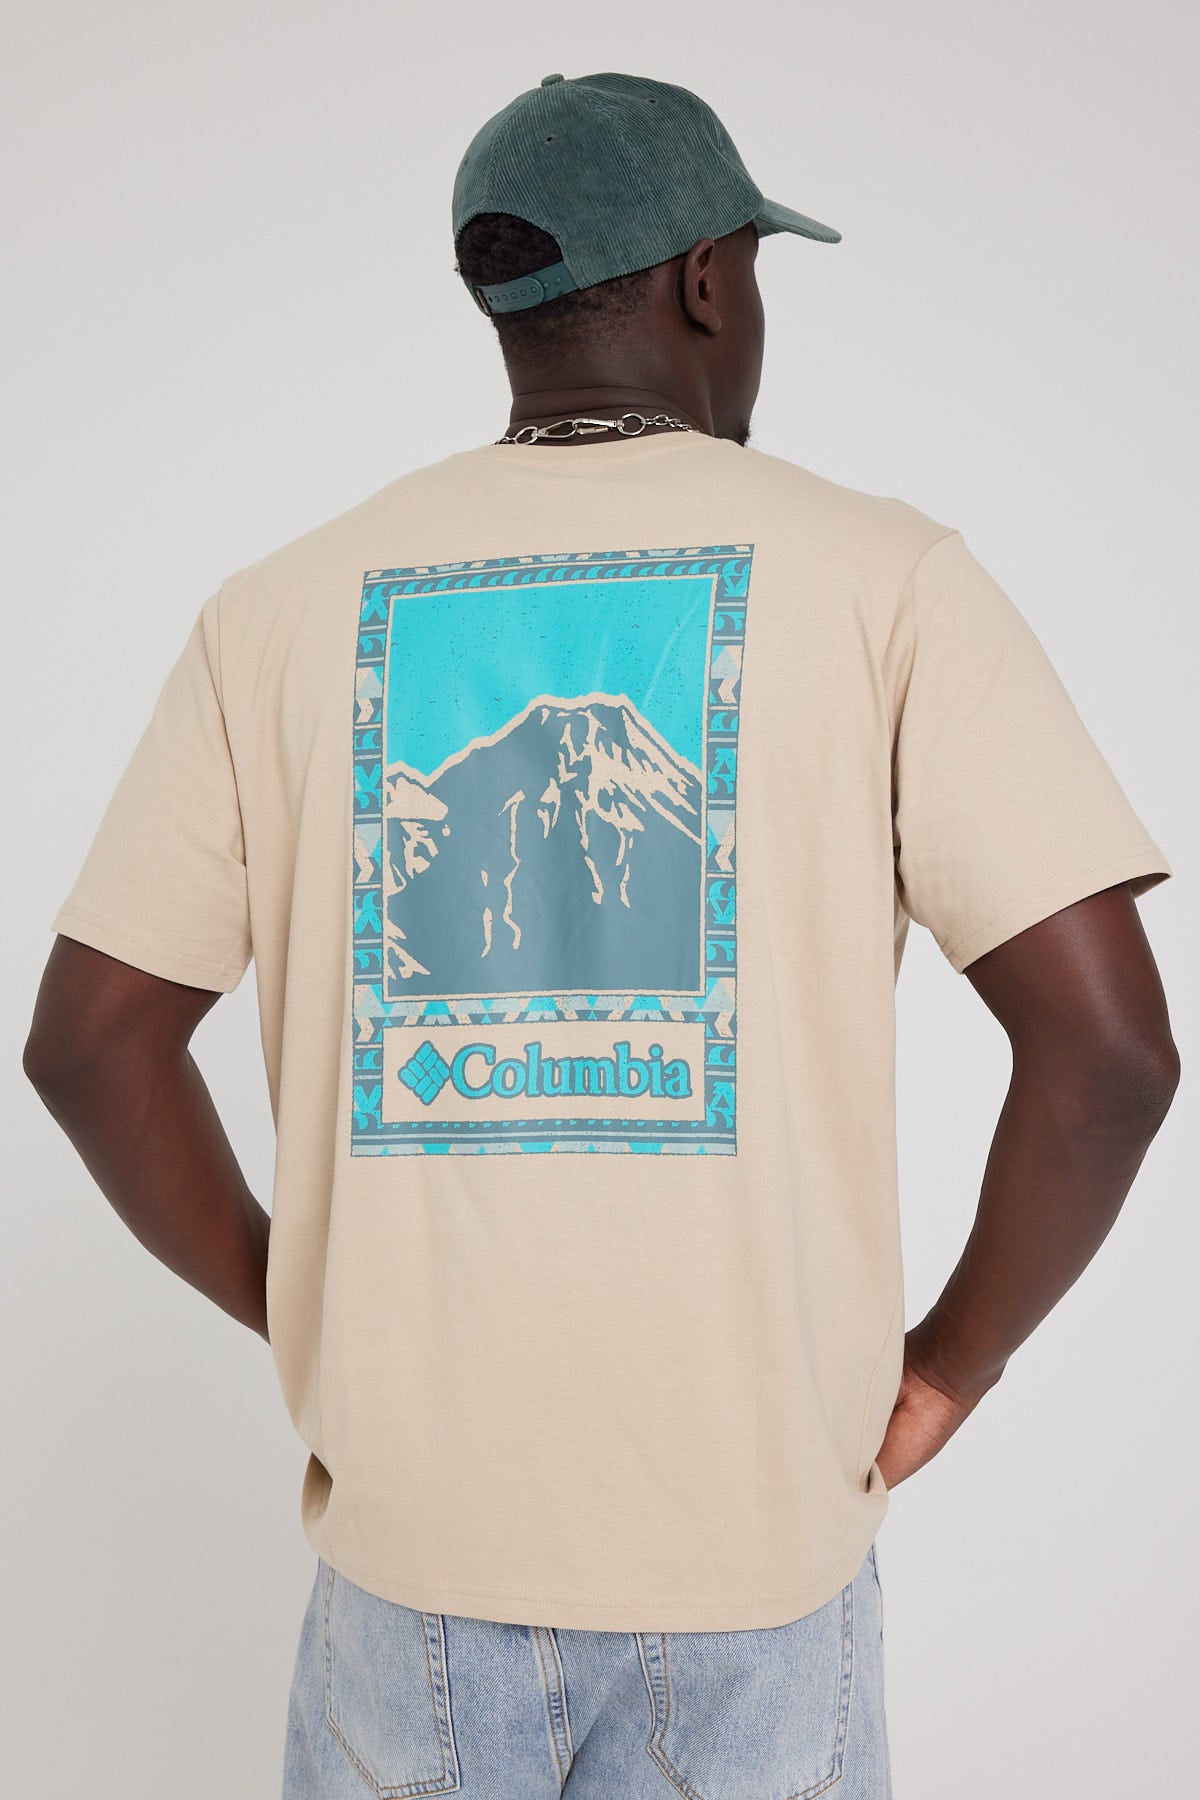 Columbia Explorers Canyon Back Tee Ancient Fossil